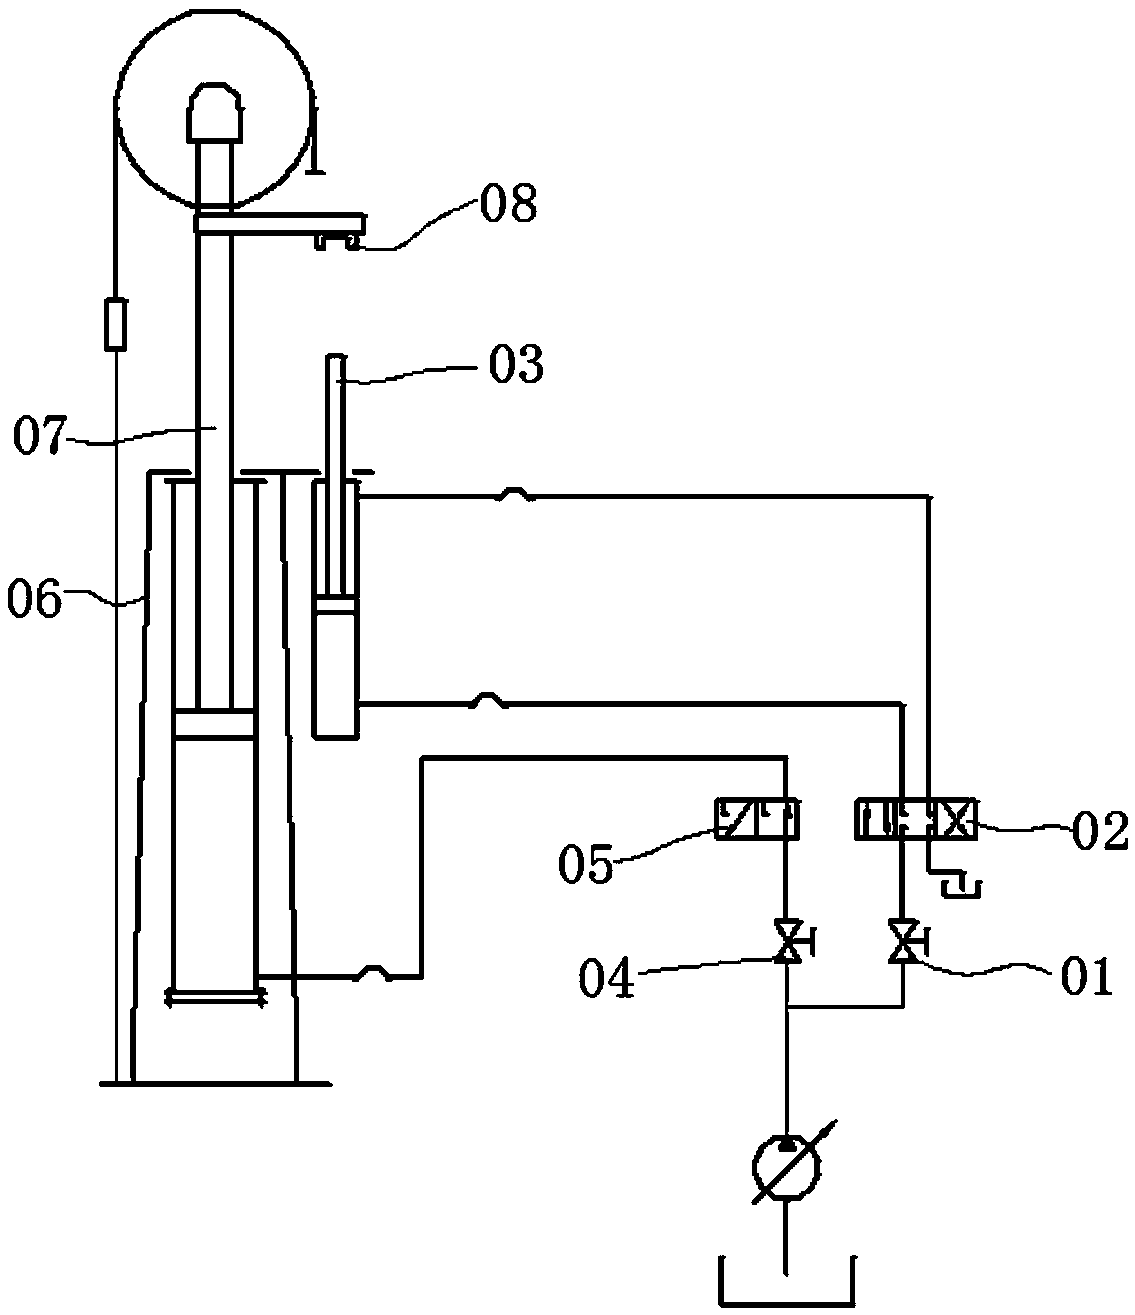 Hydraulic pumping unit and method for replacing oil cylinder piston seals without motor